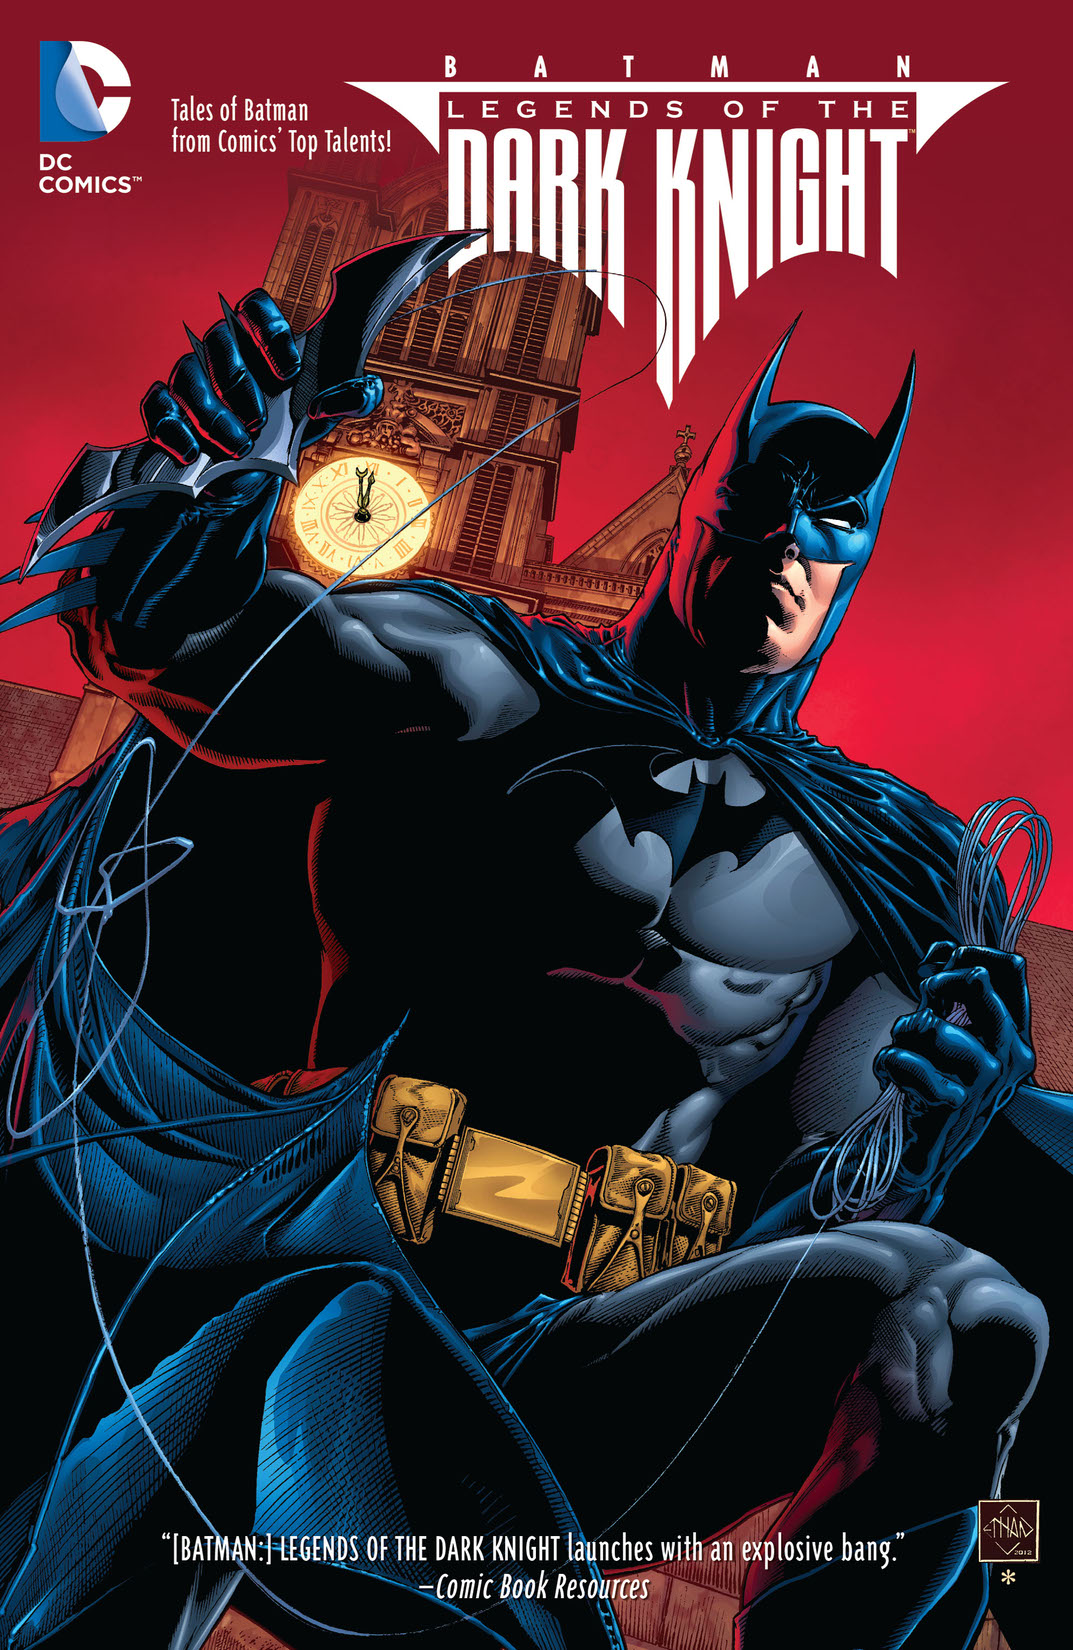 Batman: Legends of the Dark Knight Vol. 1 preview images